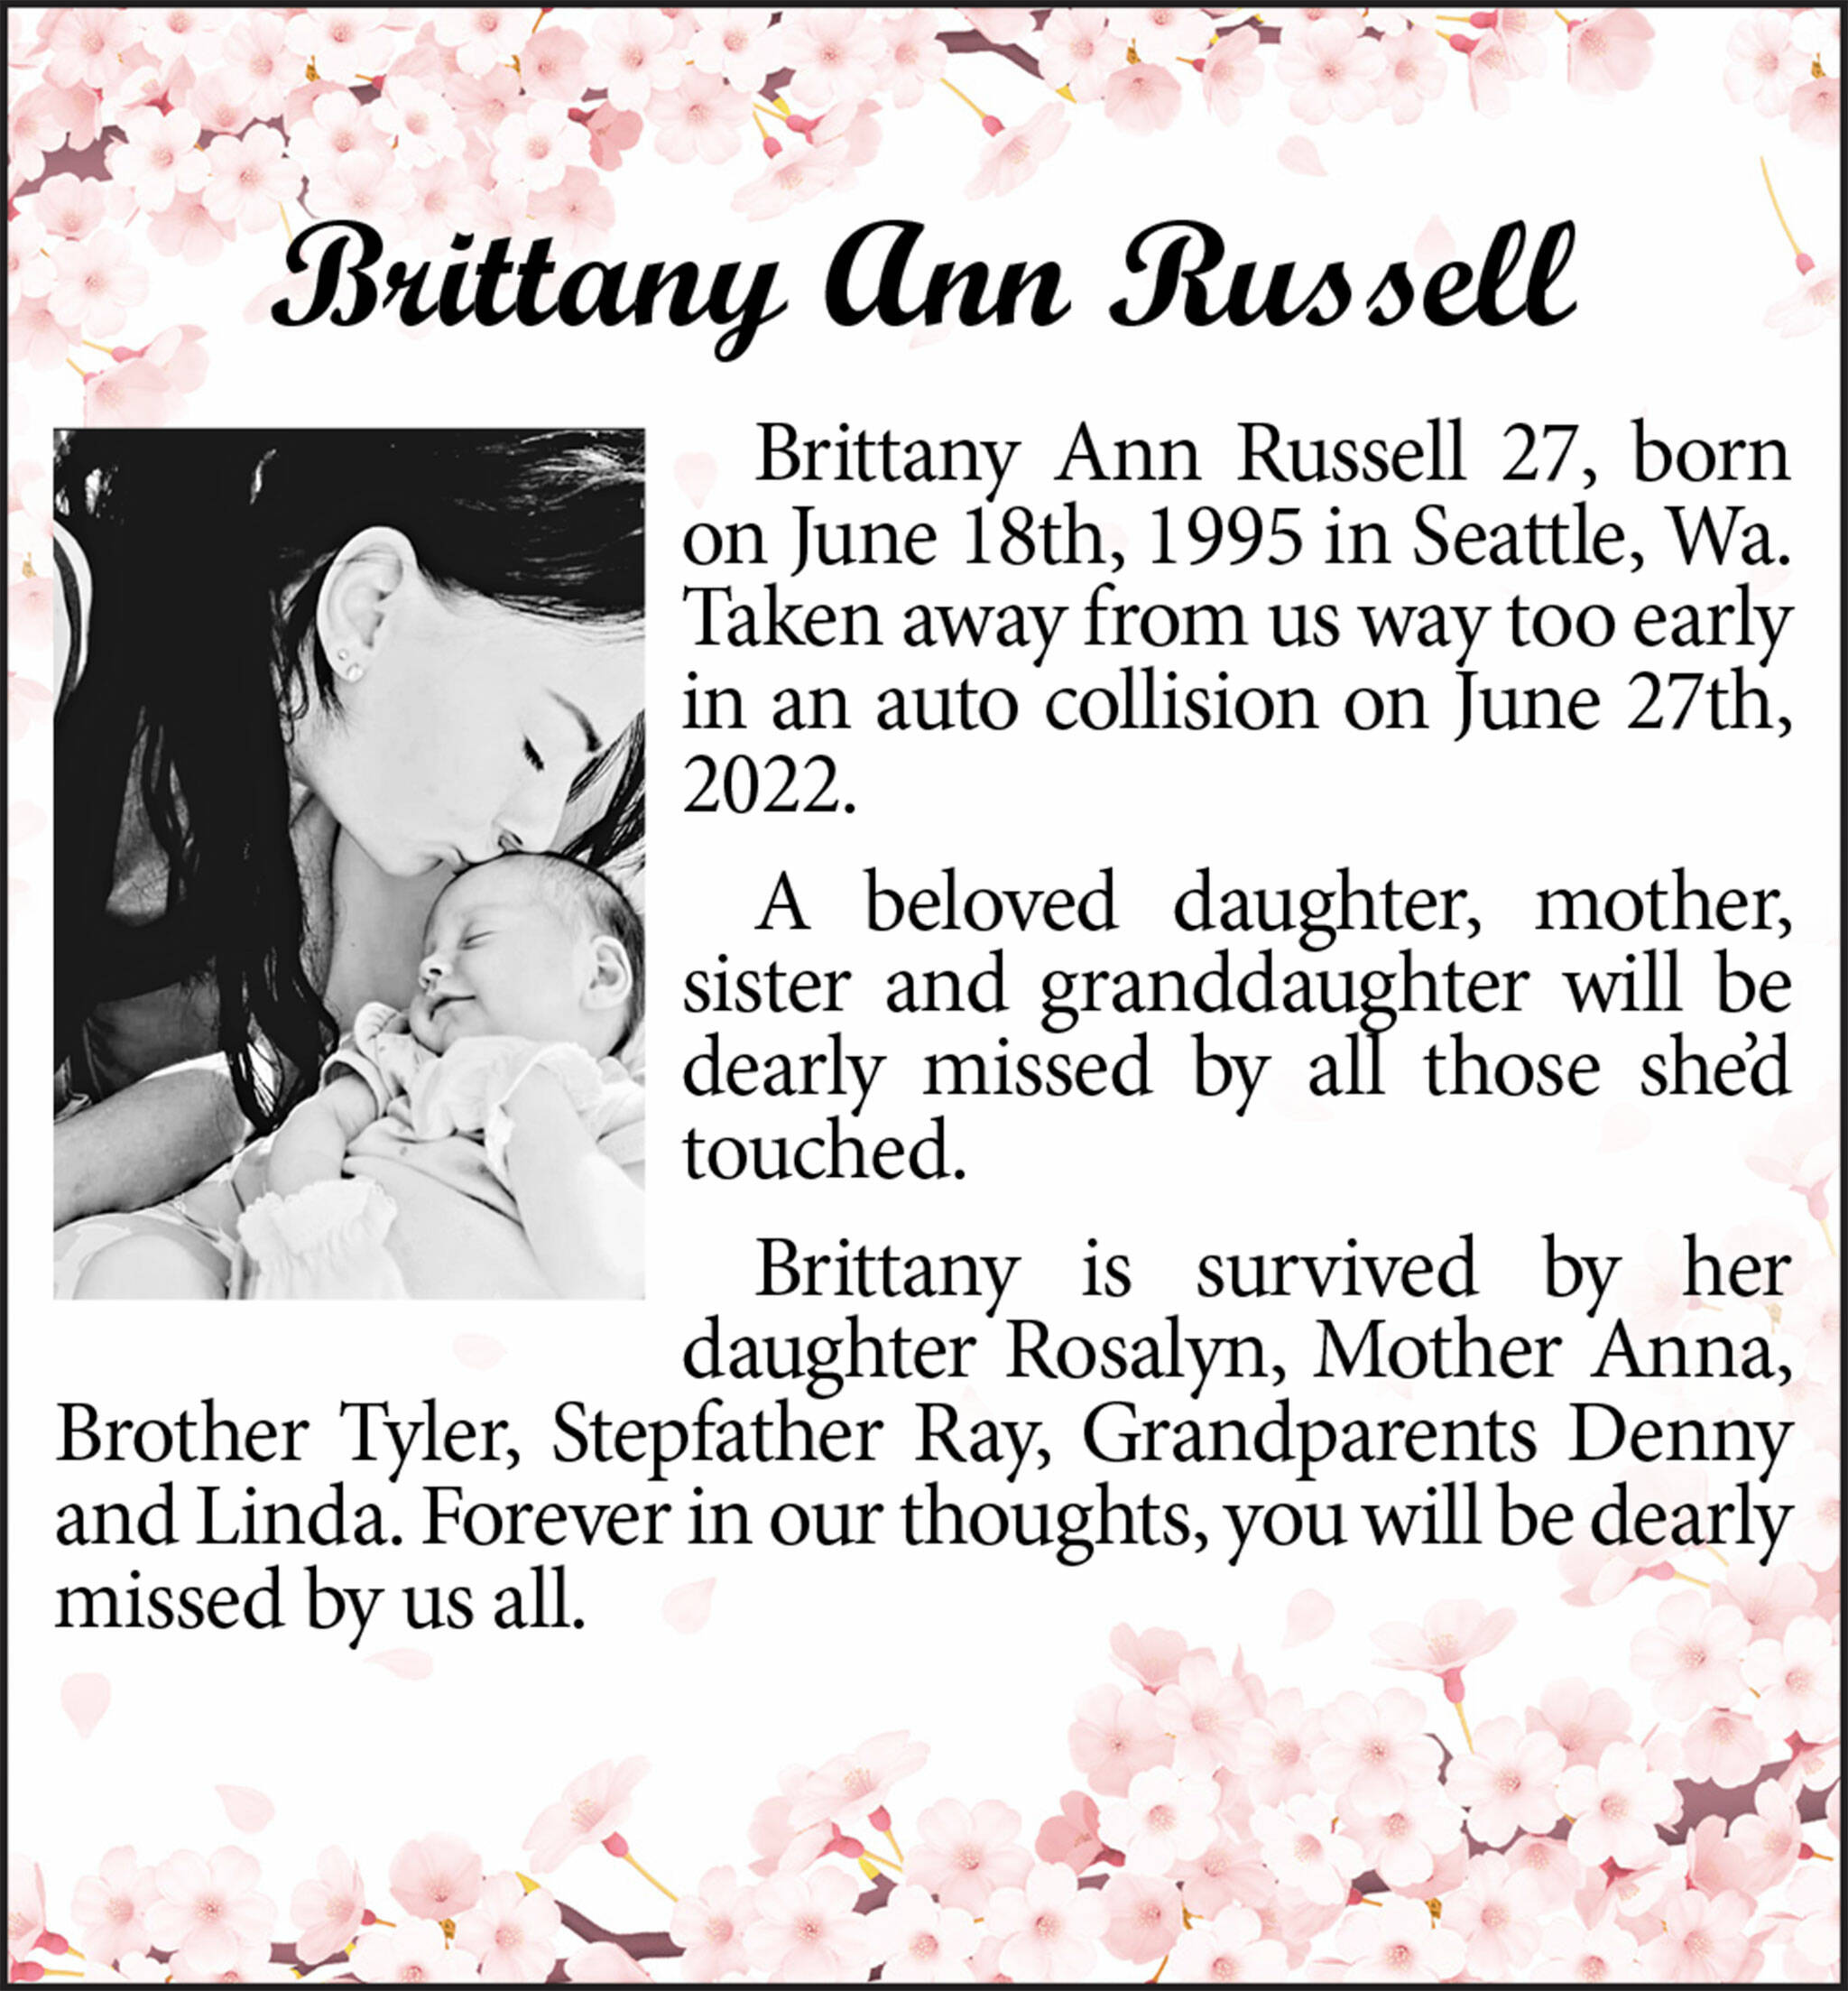 Brittany Ann Russell died June 27, 2022 at the age of 27.